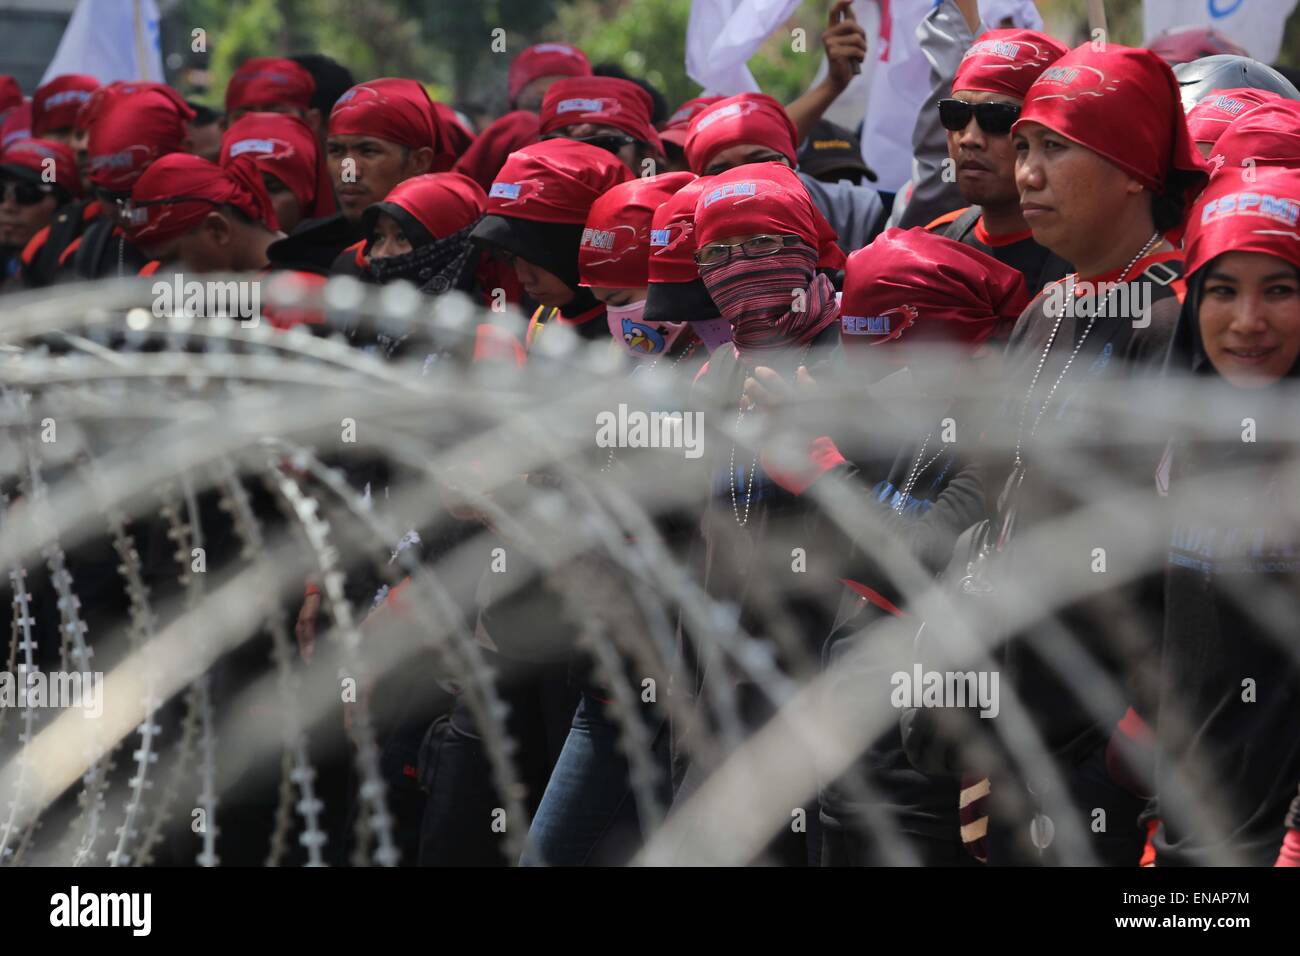 Batam, Kepri, Indonesia. 1st May, 2015. BATAM, INDONESIA - MAY 01: Indonesia labours action demanding an increase on welfare, health and remove emplyment contarcts during International Labour Day called May Day on Mei 01, 2015 in Batam, Indonesia. Credit:  Sijori Images/ZUMA Wire/Alamy Live News Stock Photo